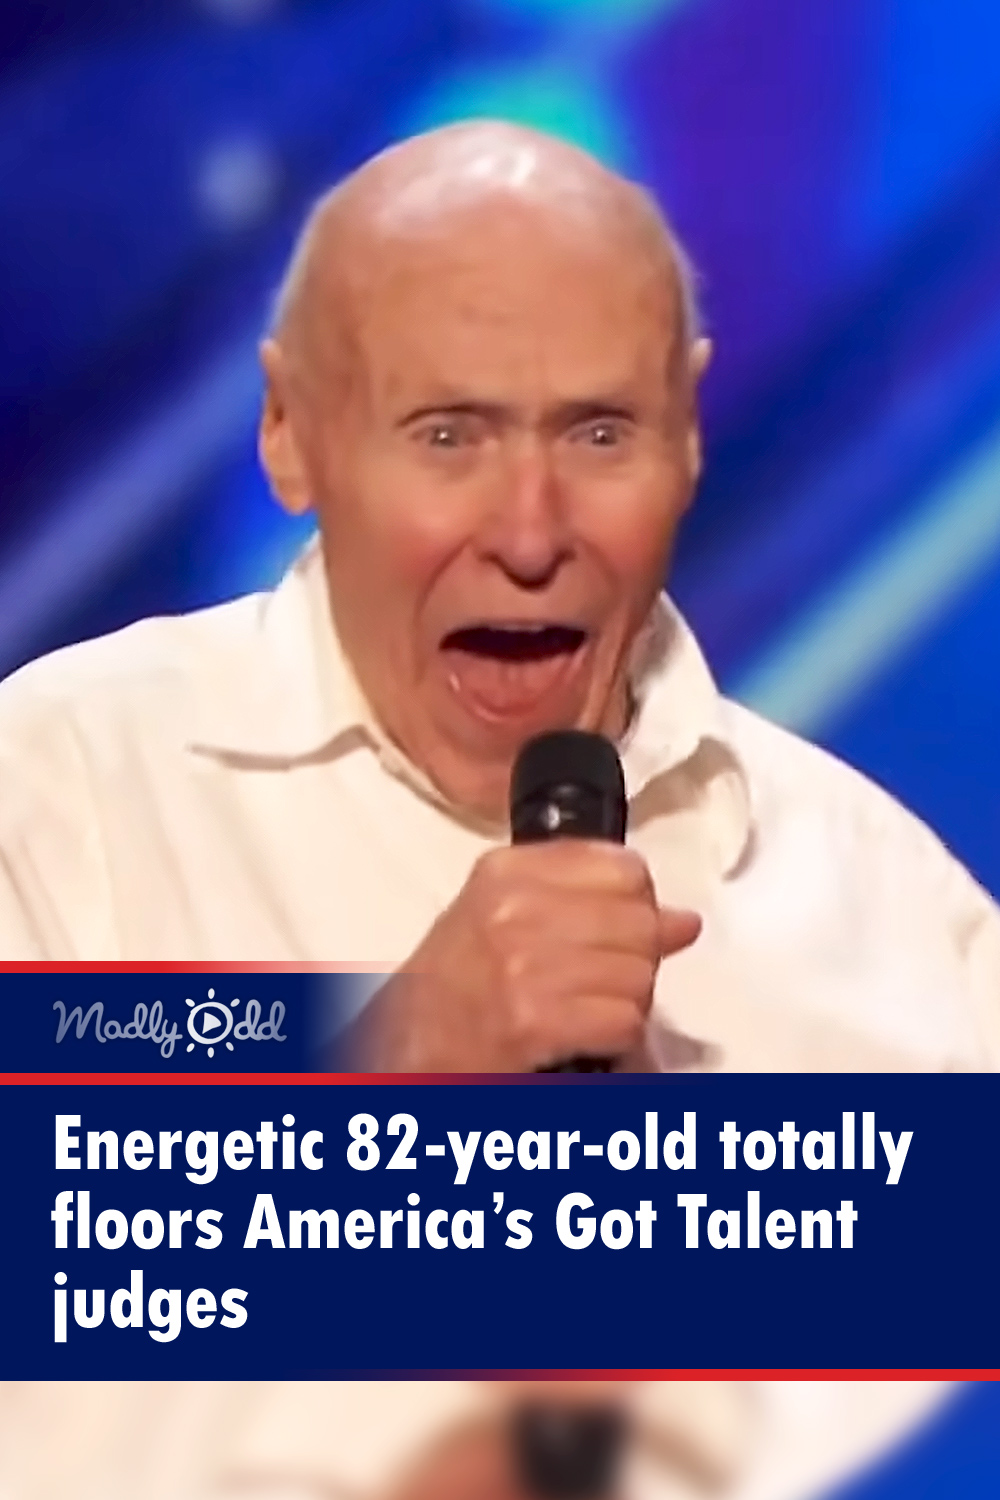 Energetic 82-year-old totally floors America’s Got Talent judges